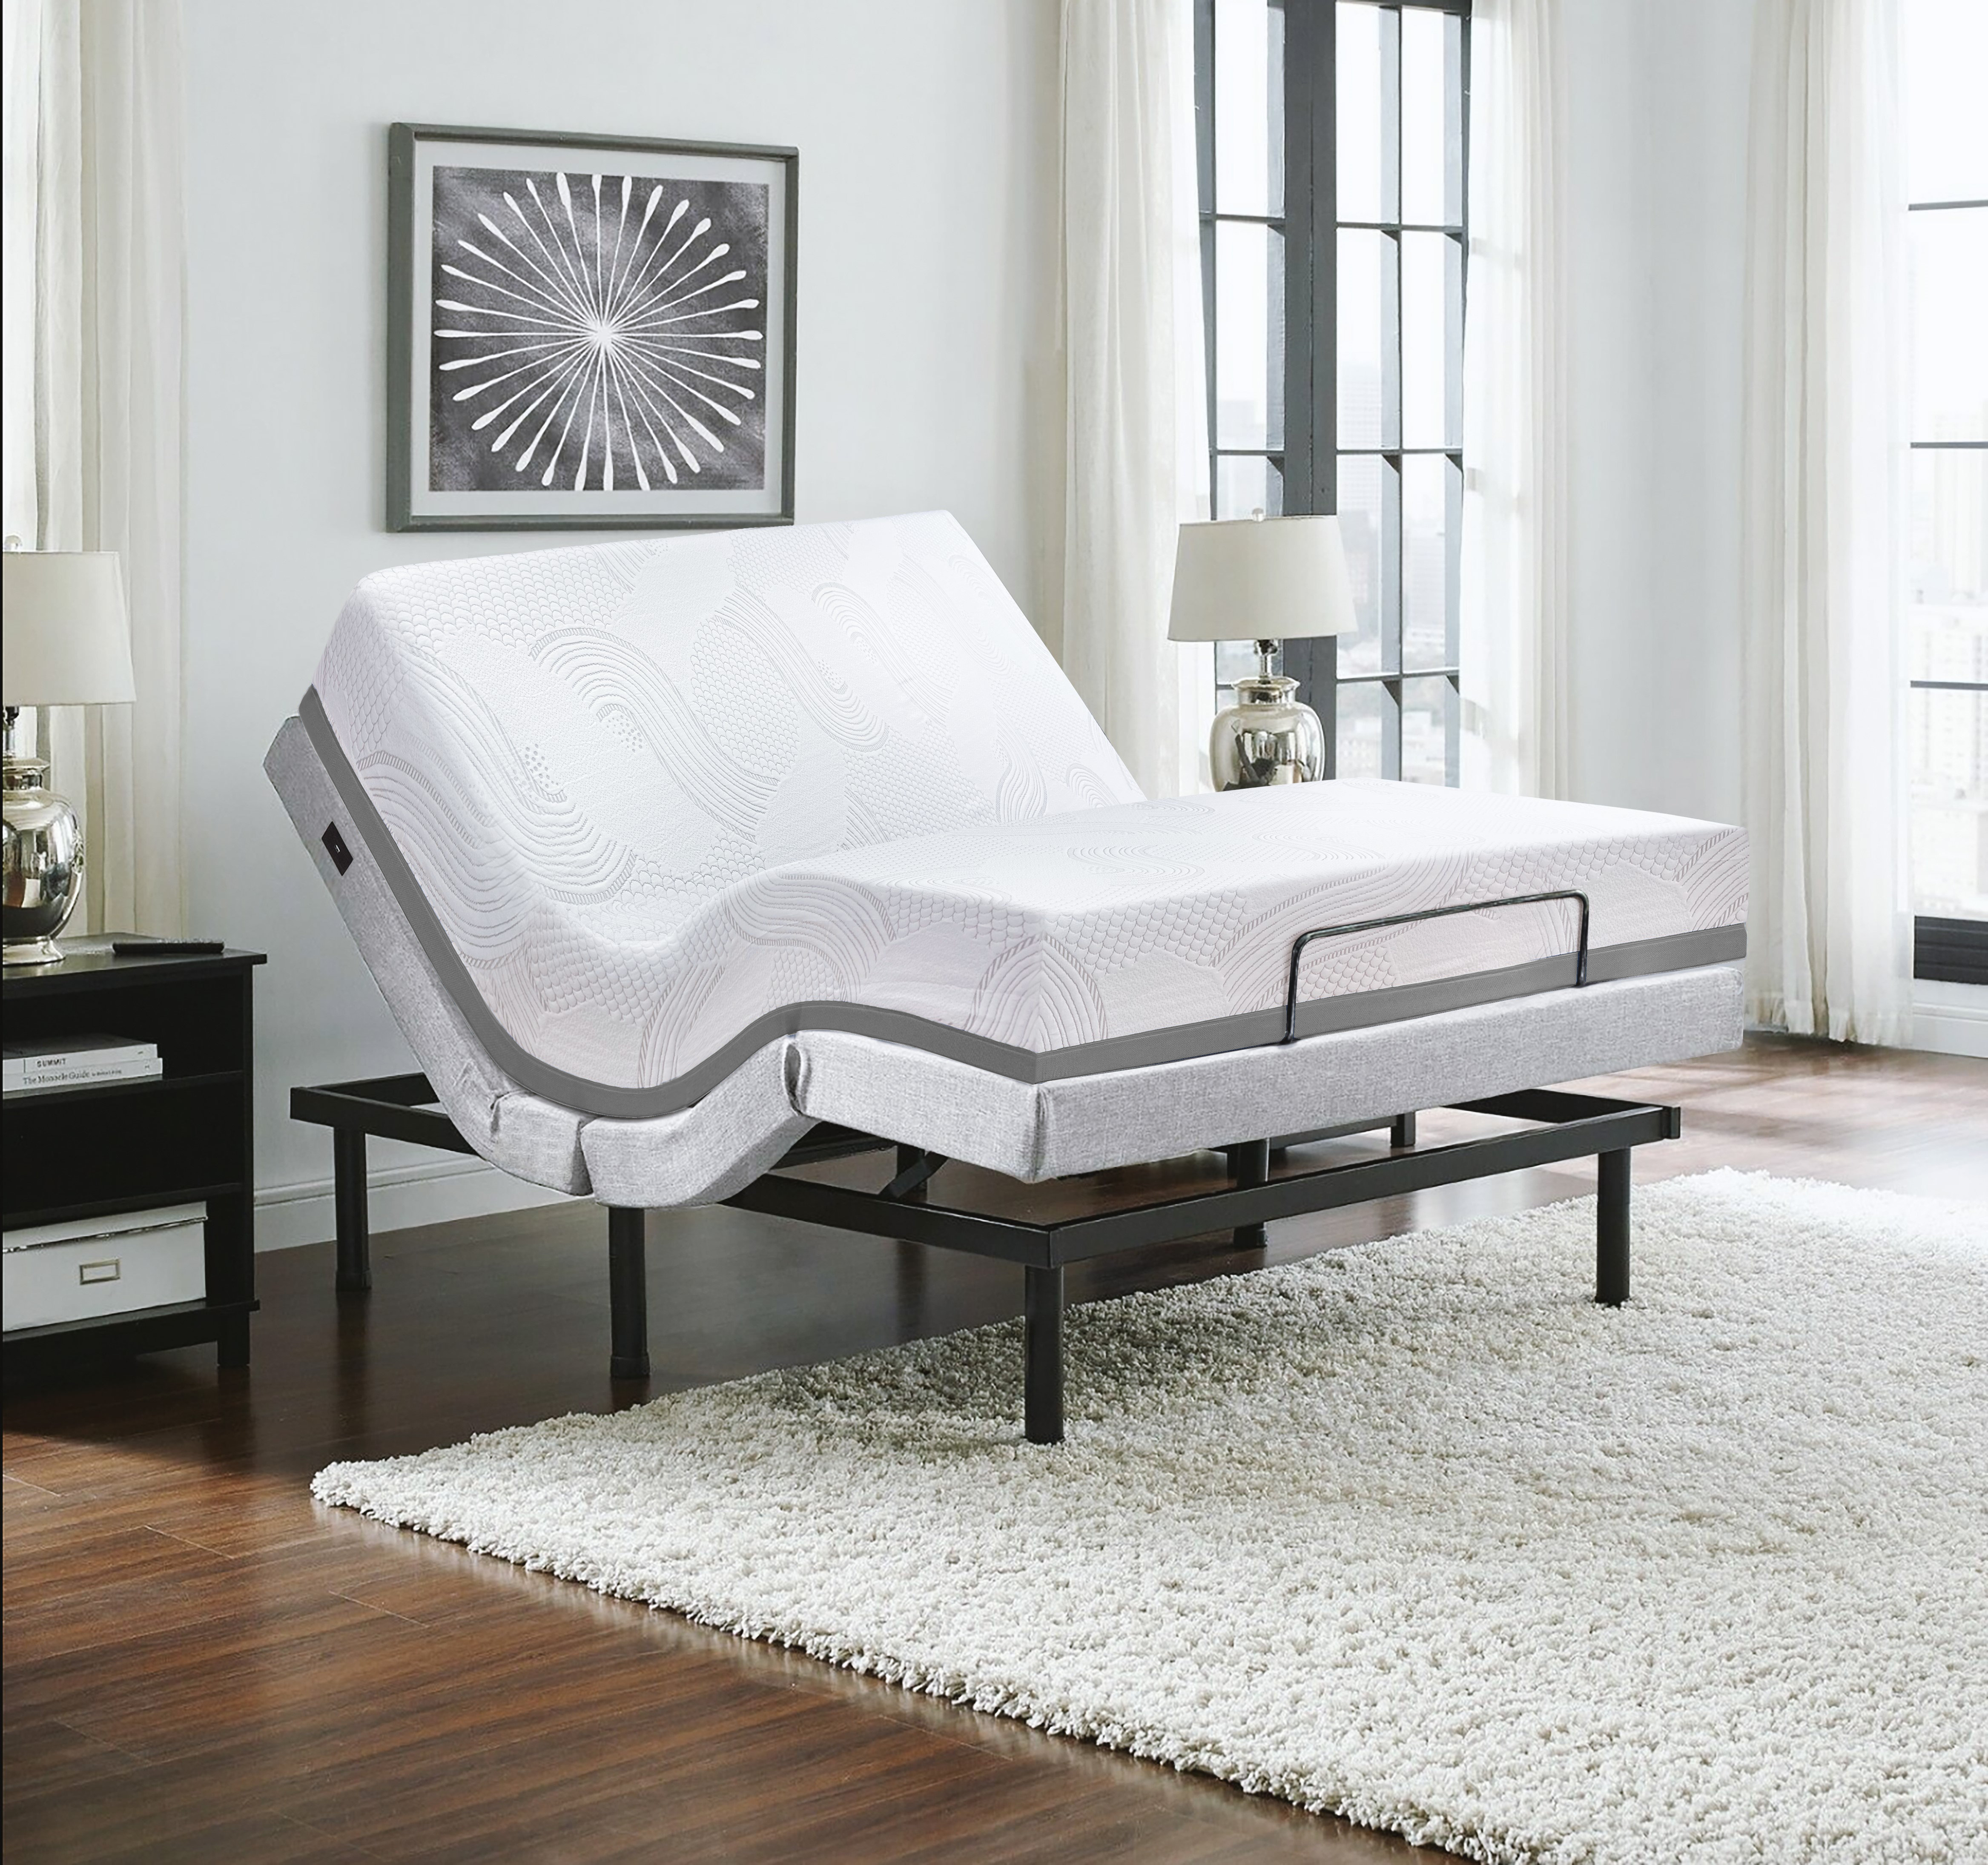 Massaging Adjustable Bed with Wireless Remote Mattress Included